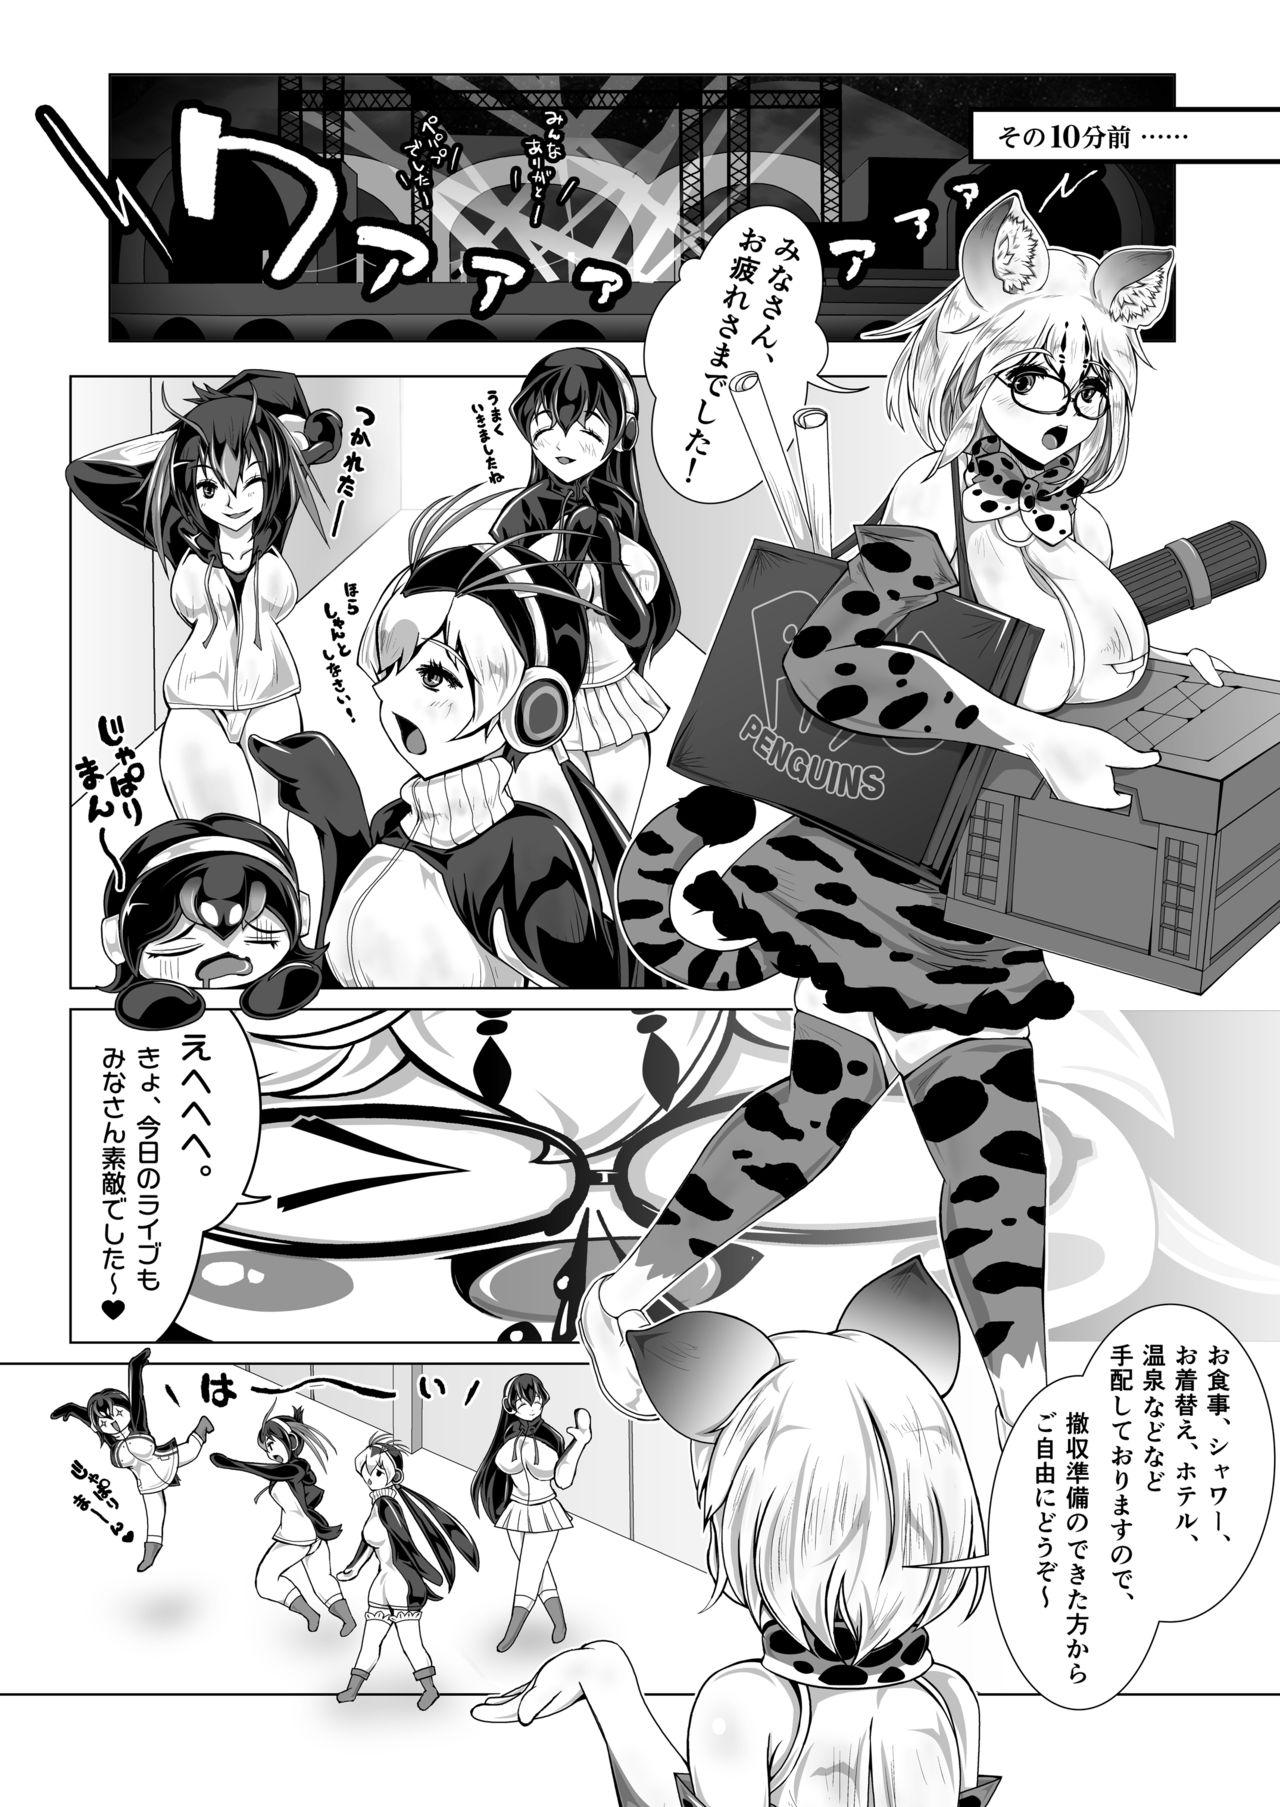 Bokep Margay no PPP Management - Kemono friends Women Sucking Dick - Page 4